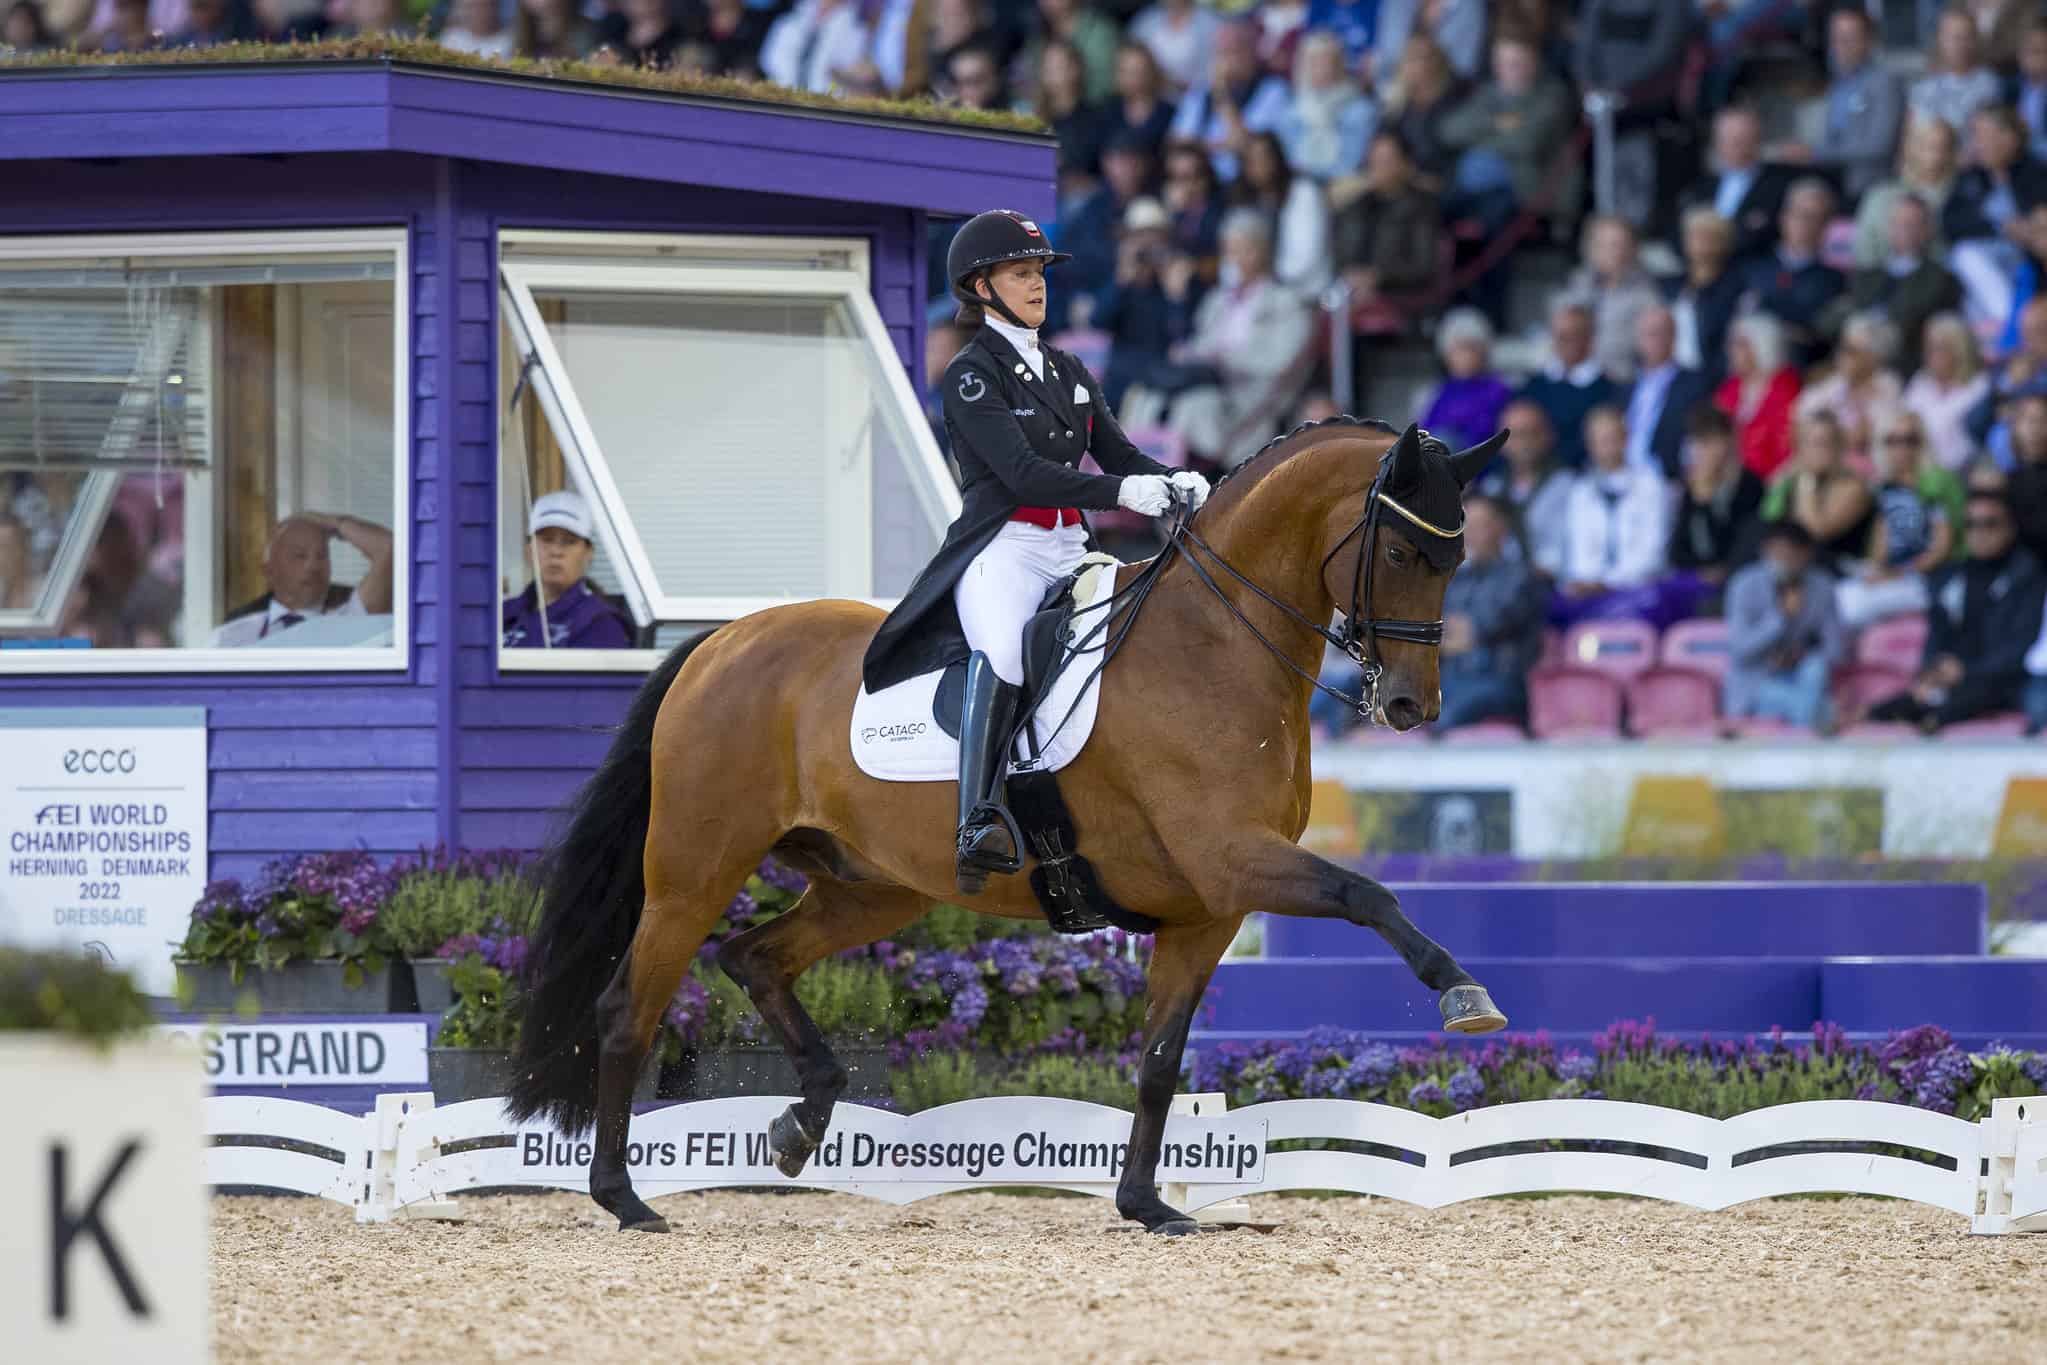 Catherine Dufour and Vamos Amigos. Photo by FEI/Leanjo de Koster.